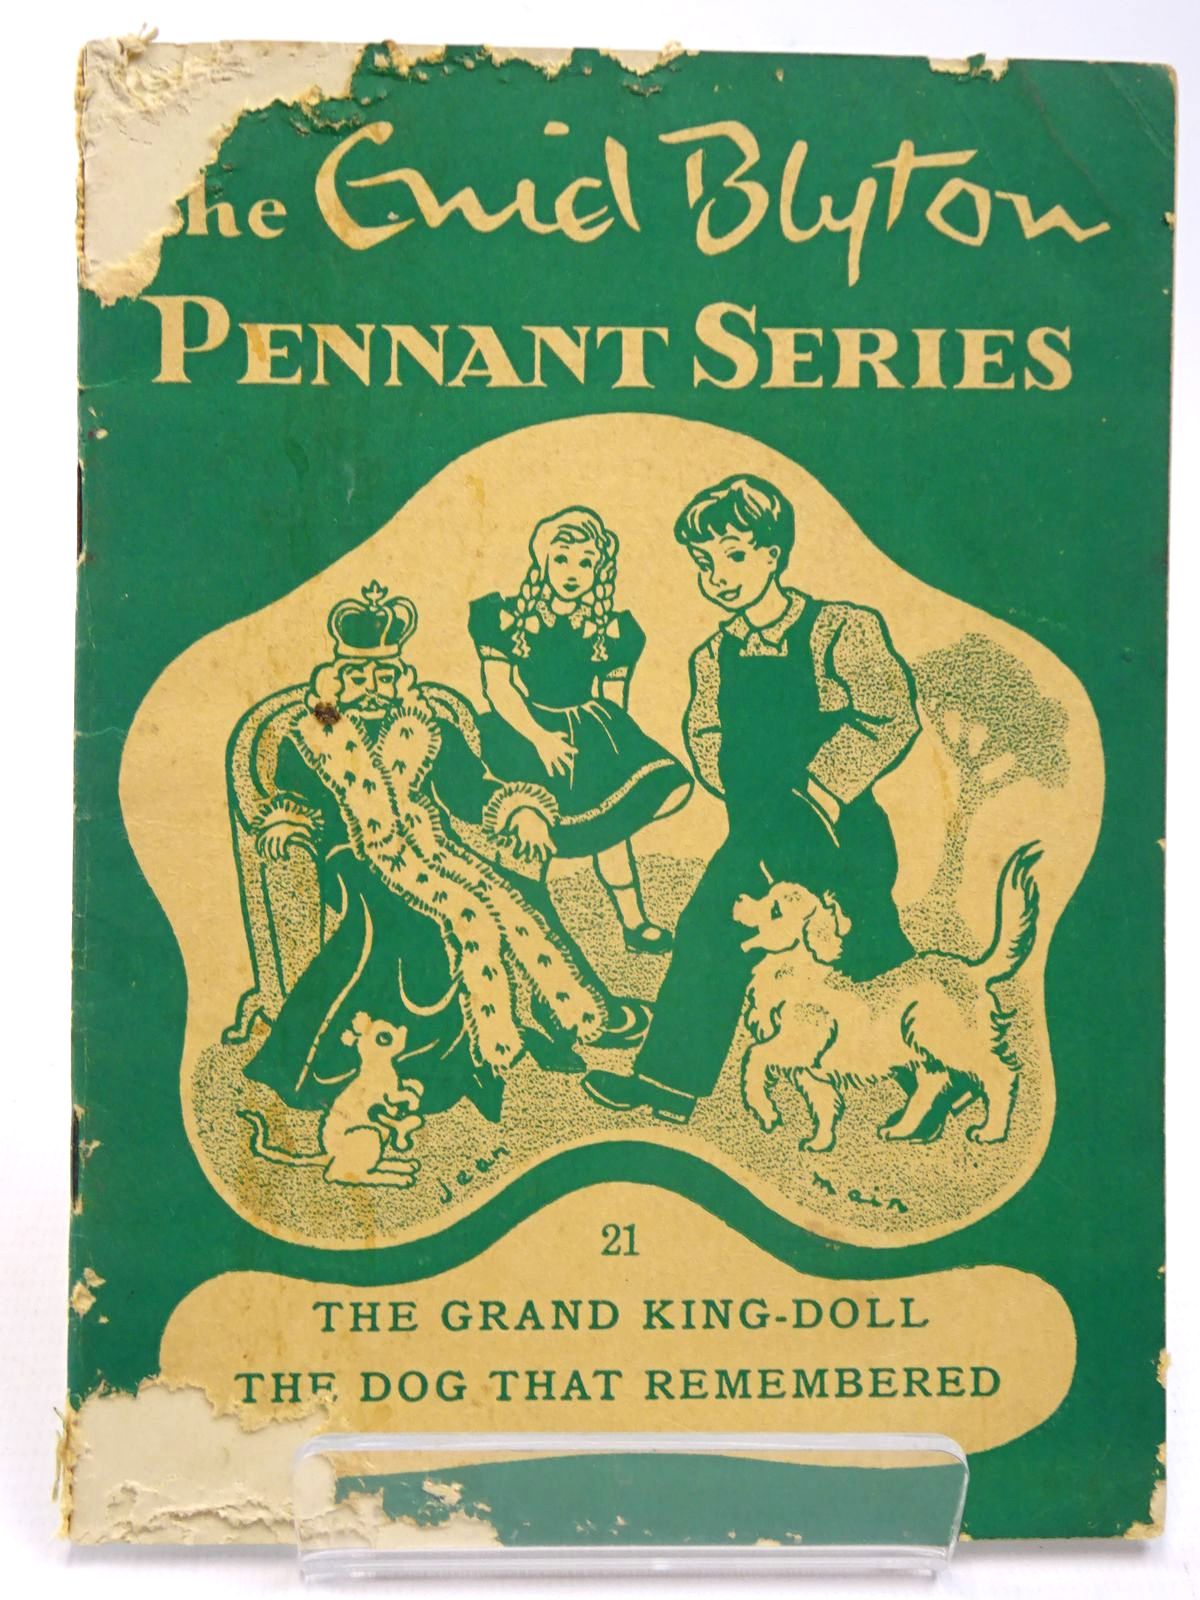 Photo of THE ENID BLYTON PENNANT SERIES No. 21 THE GRAND KING-DOLL / THE DOG THAT REMEMBERED written by Blyton, Enid illustrated by Soper, Eileen Main, Jean published by Macmillan &amp; Co. Ltd. (STOCK CODE: 2130533)  for sale by Stella & Rose's Books